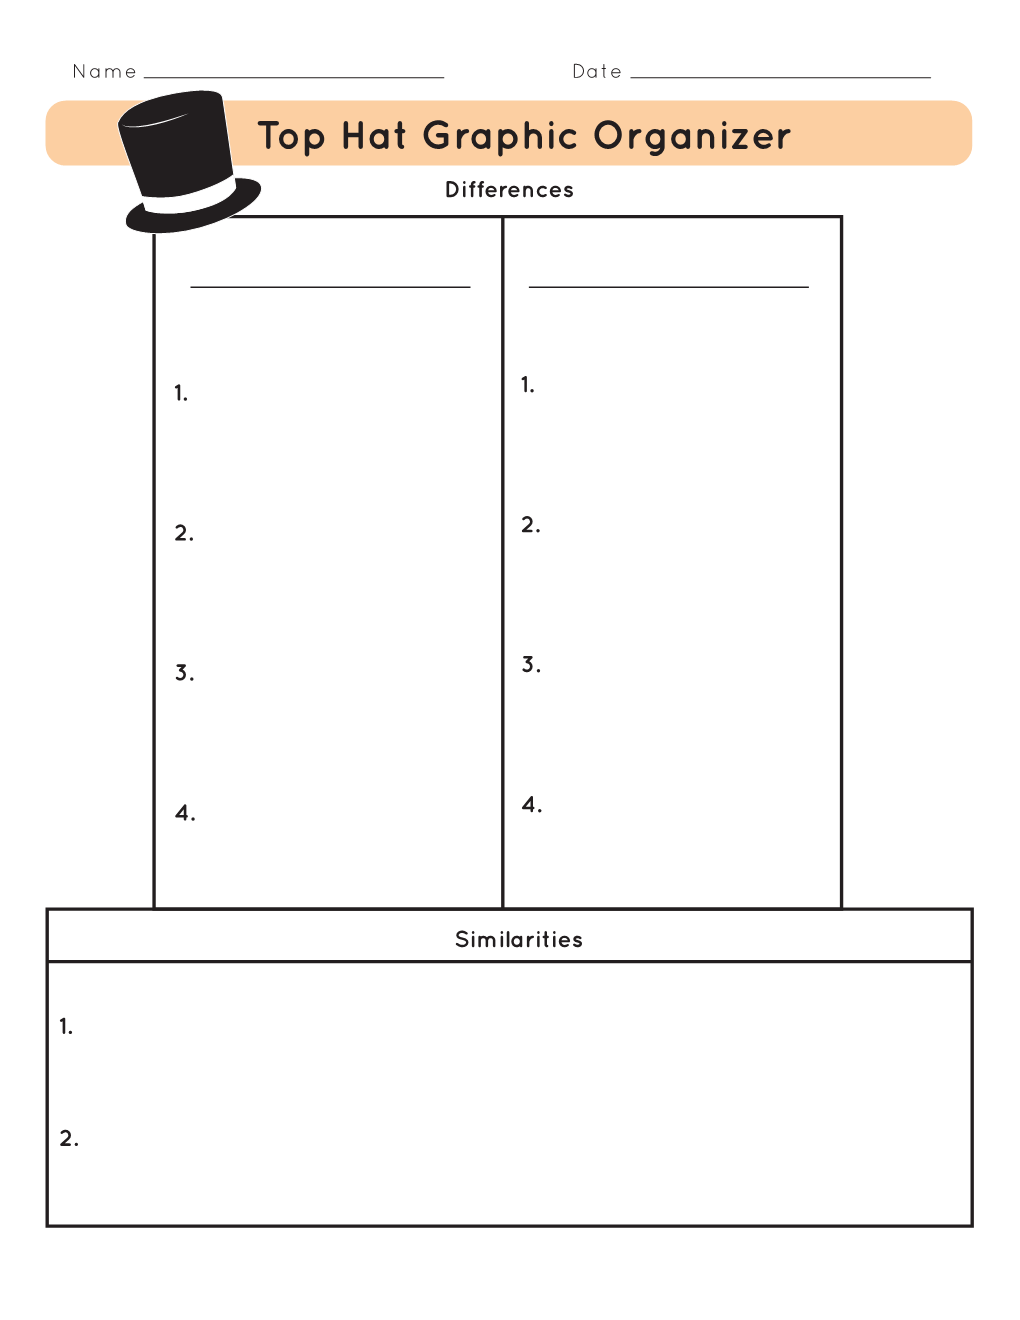 Top Hat Graphic Organizer Differences